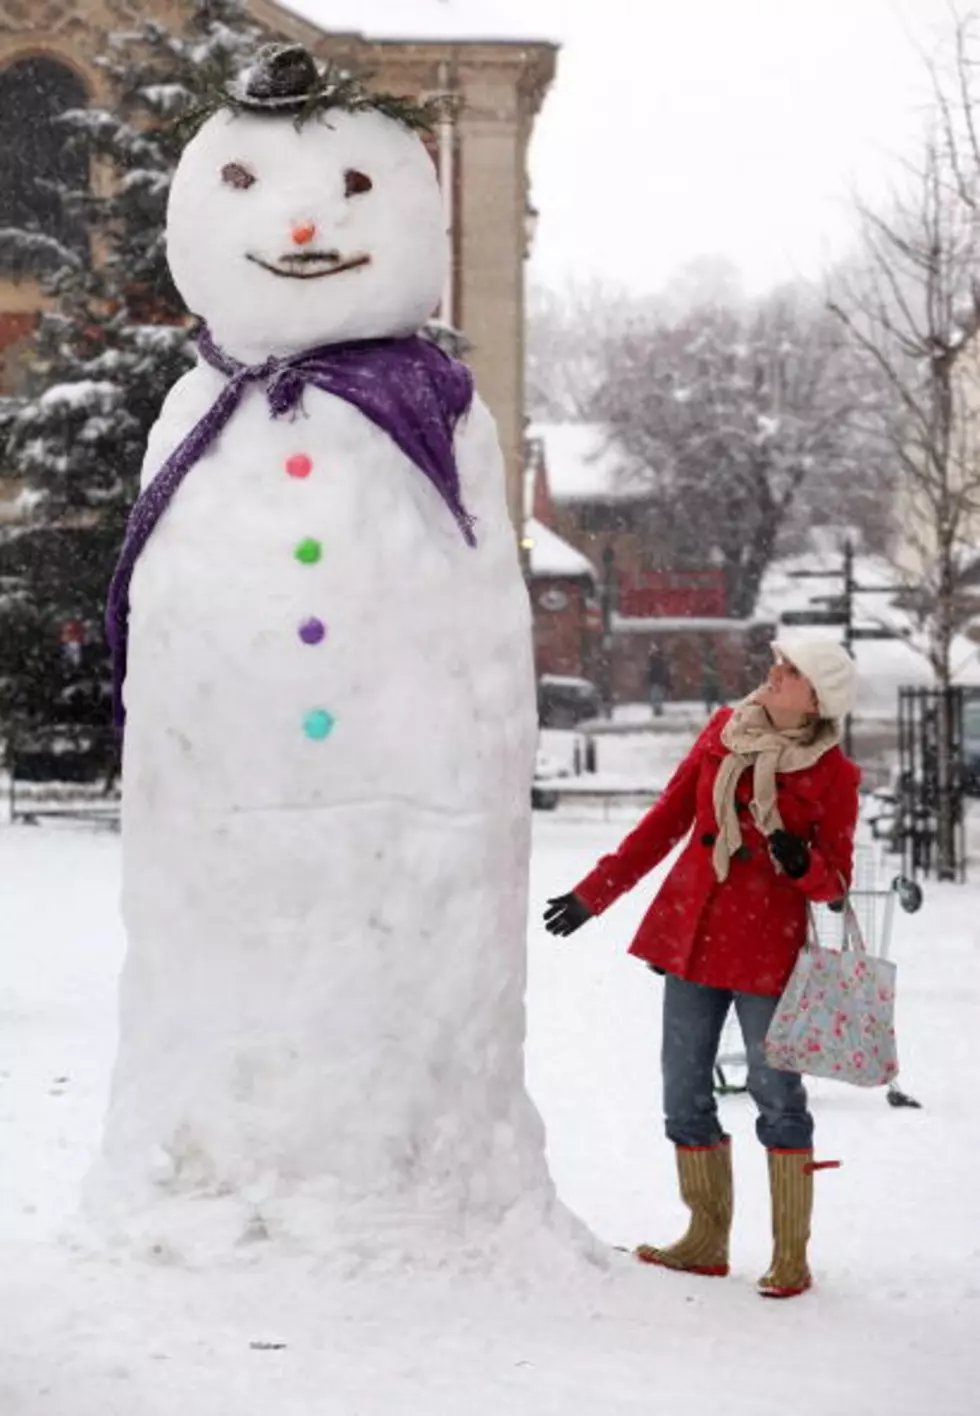 Frozen Godzilla of The Upper Midwest: Giant Snowman Towers Over Minnesota